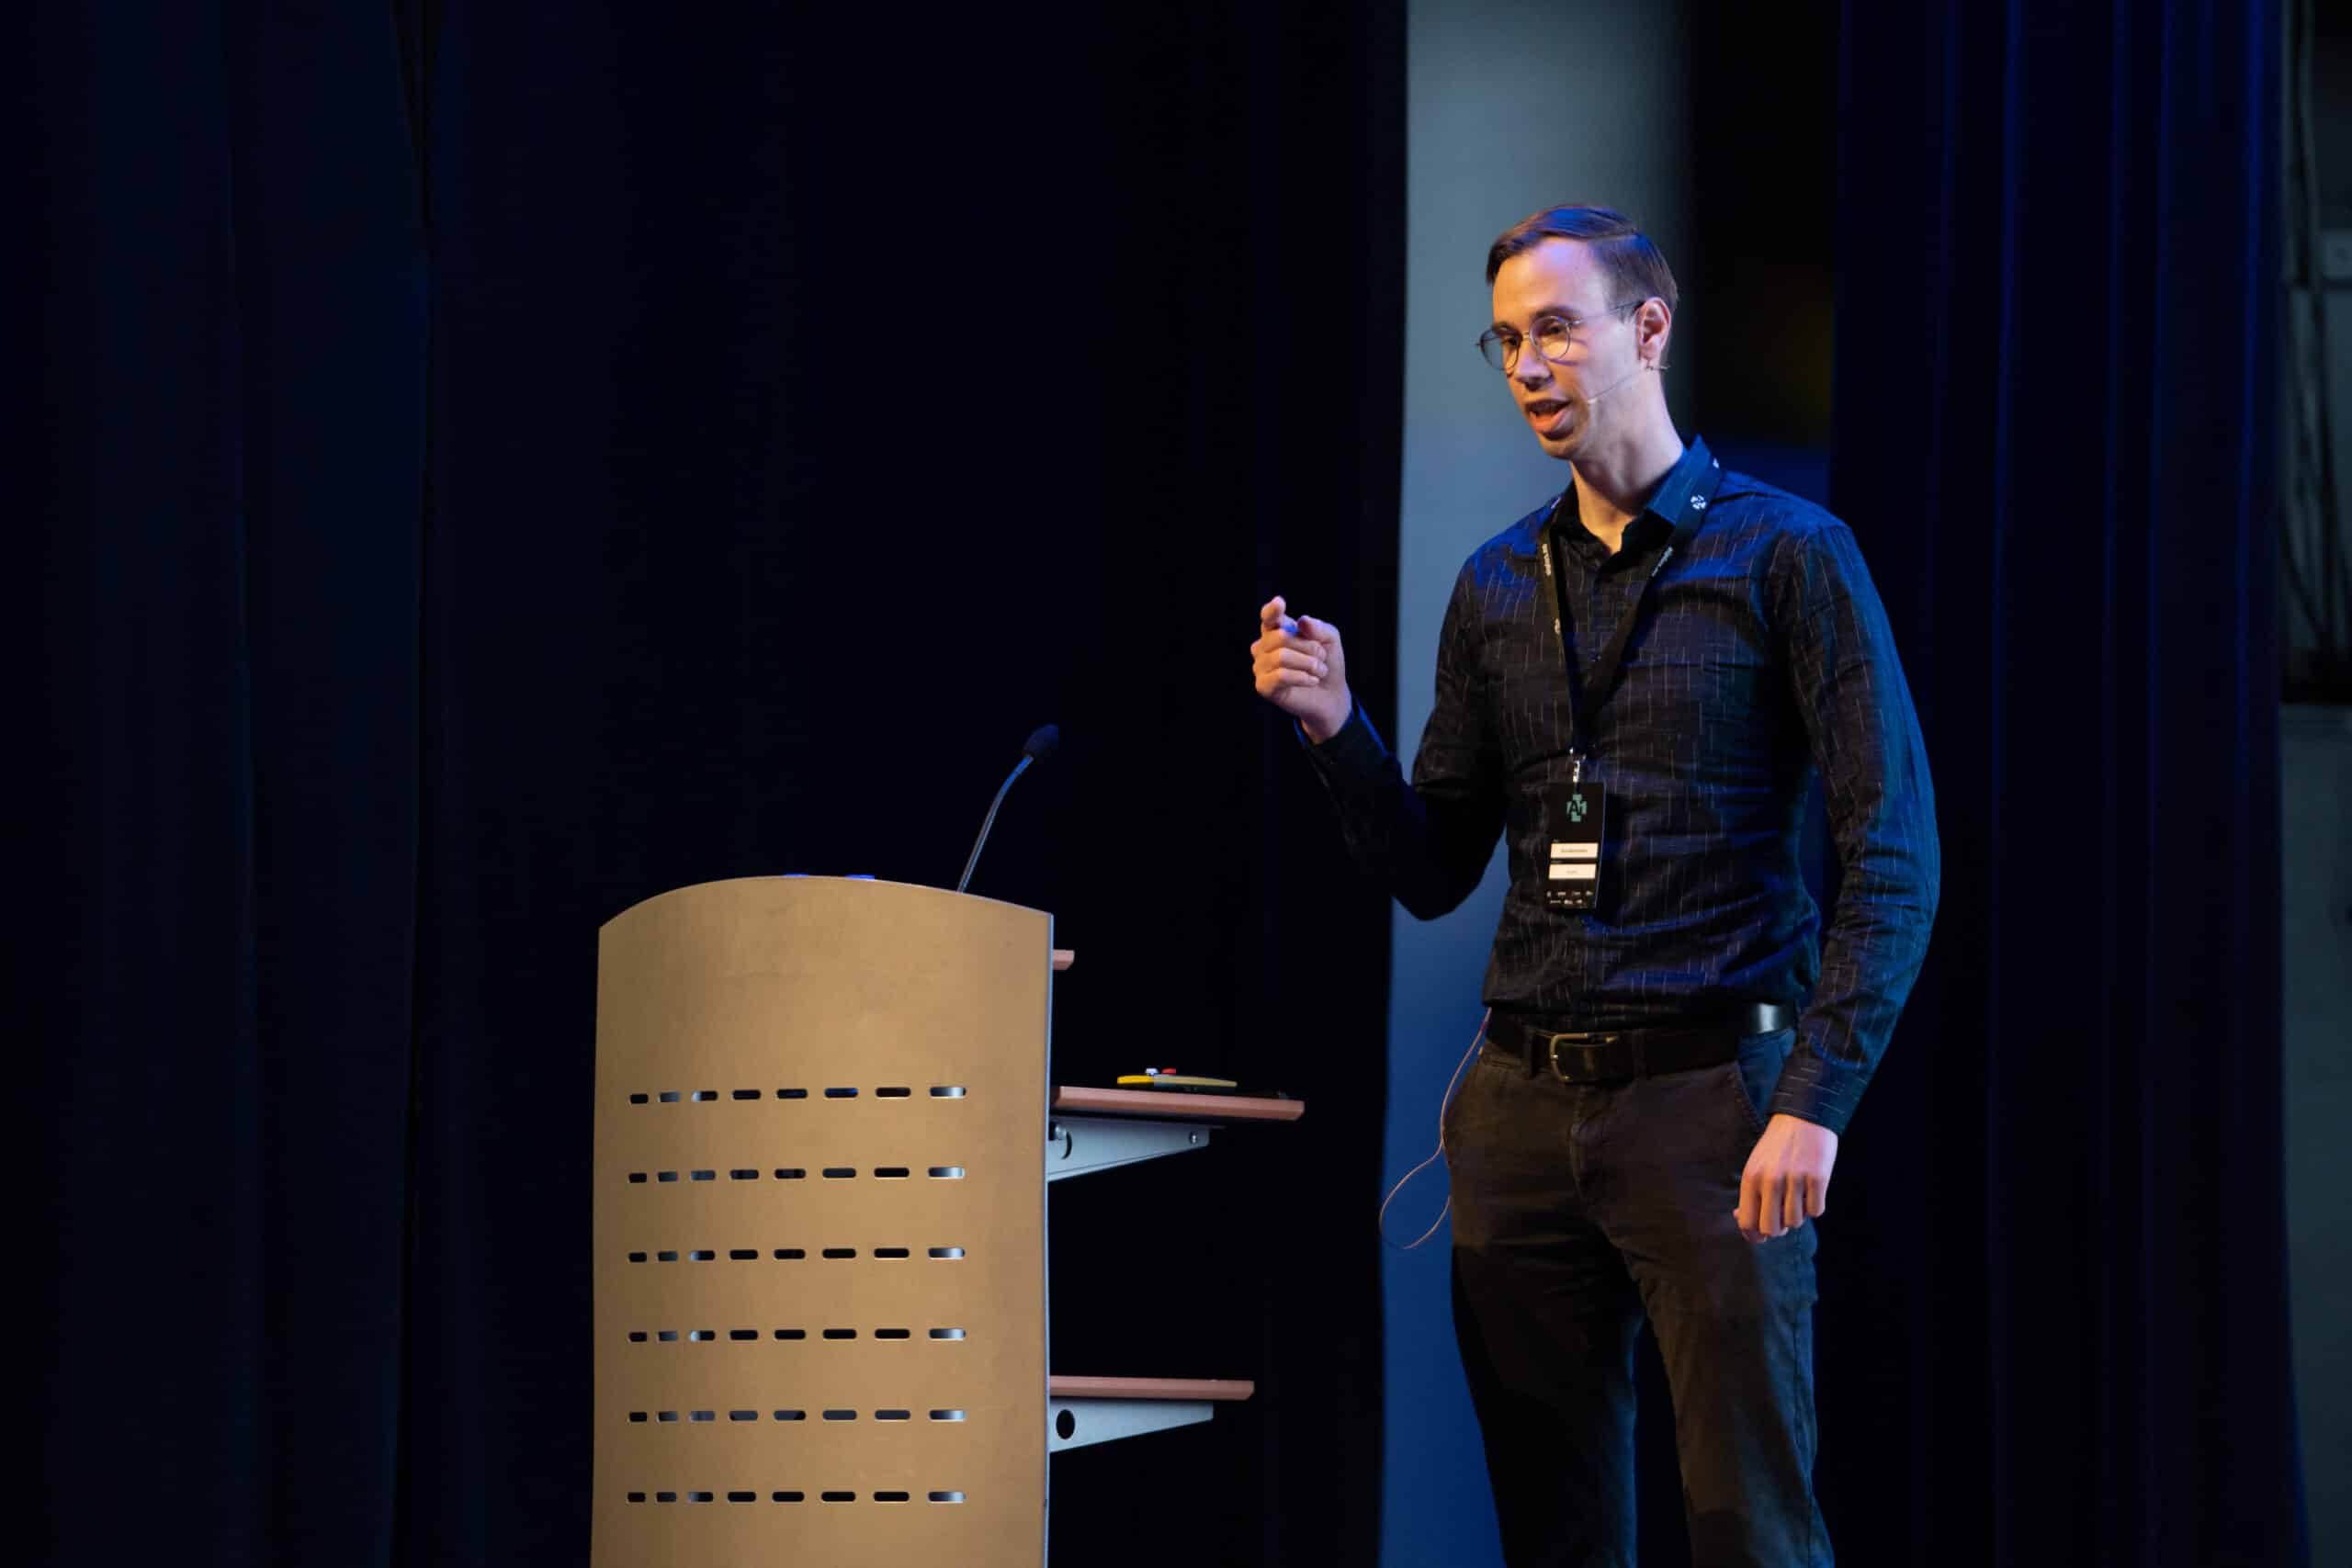 David Skålid Amundsen is Lead Data Scientist Consultant at Computas and talked about how Ruter uses AI to predict the numbers of passengers on busses. PHOTO: Stein Johnsen, Contentvideo.no